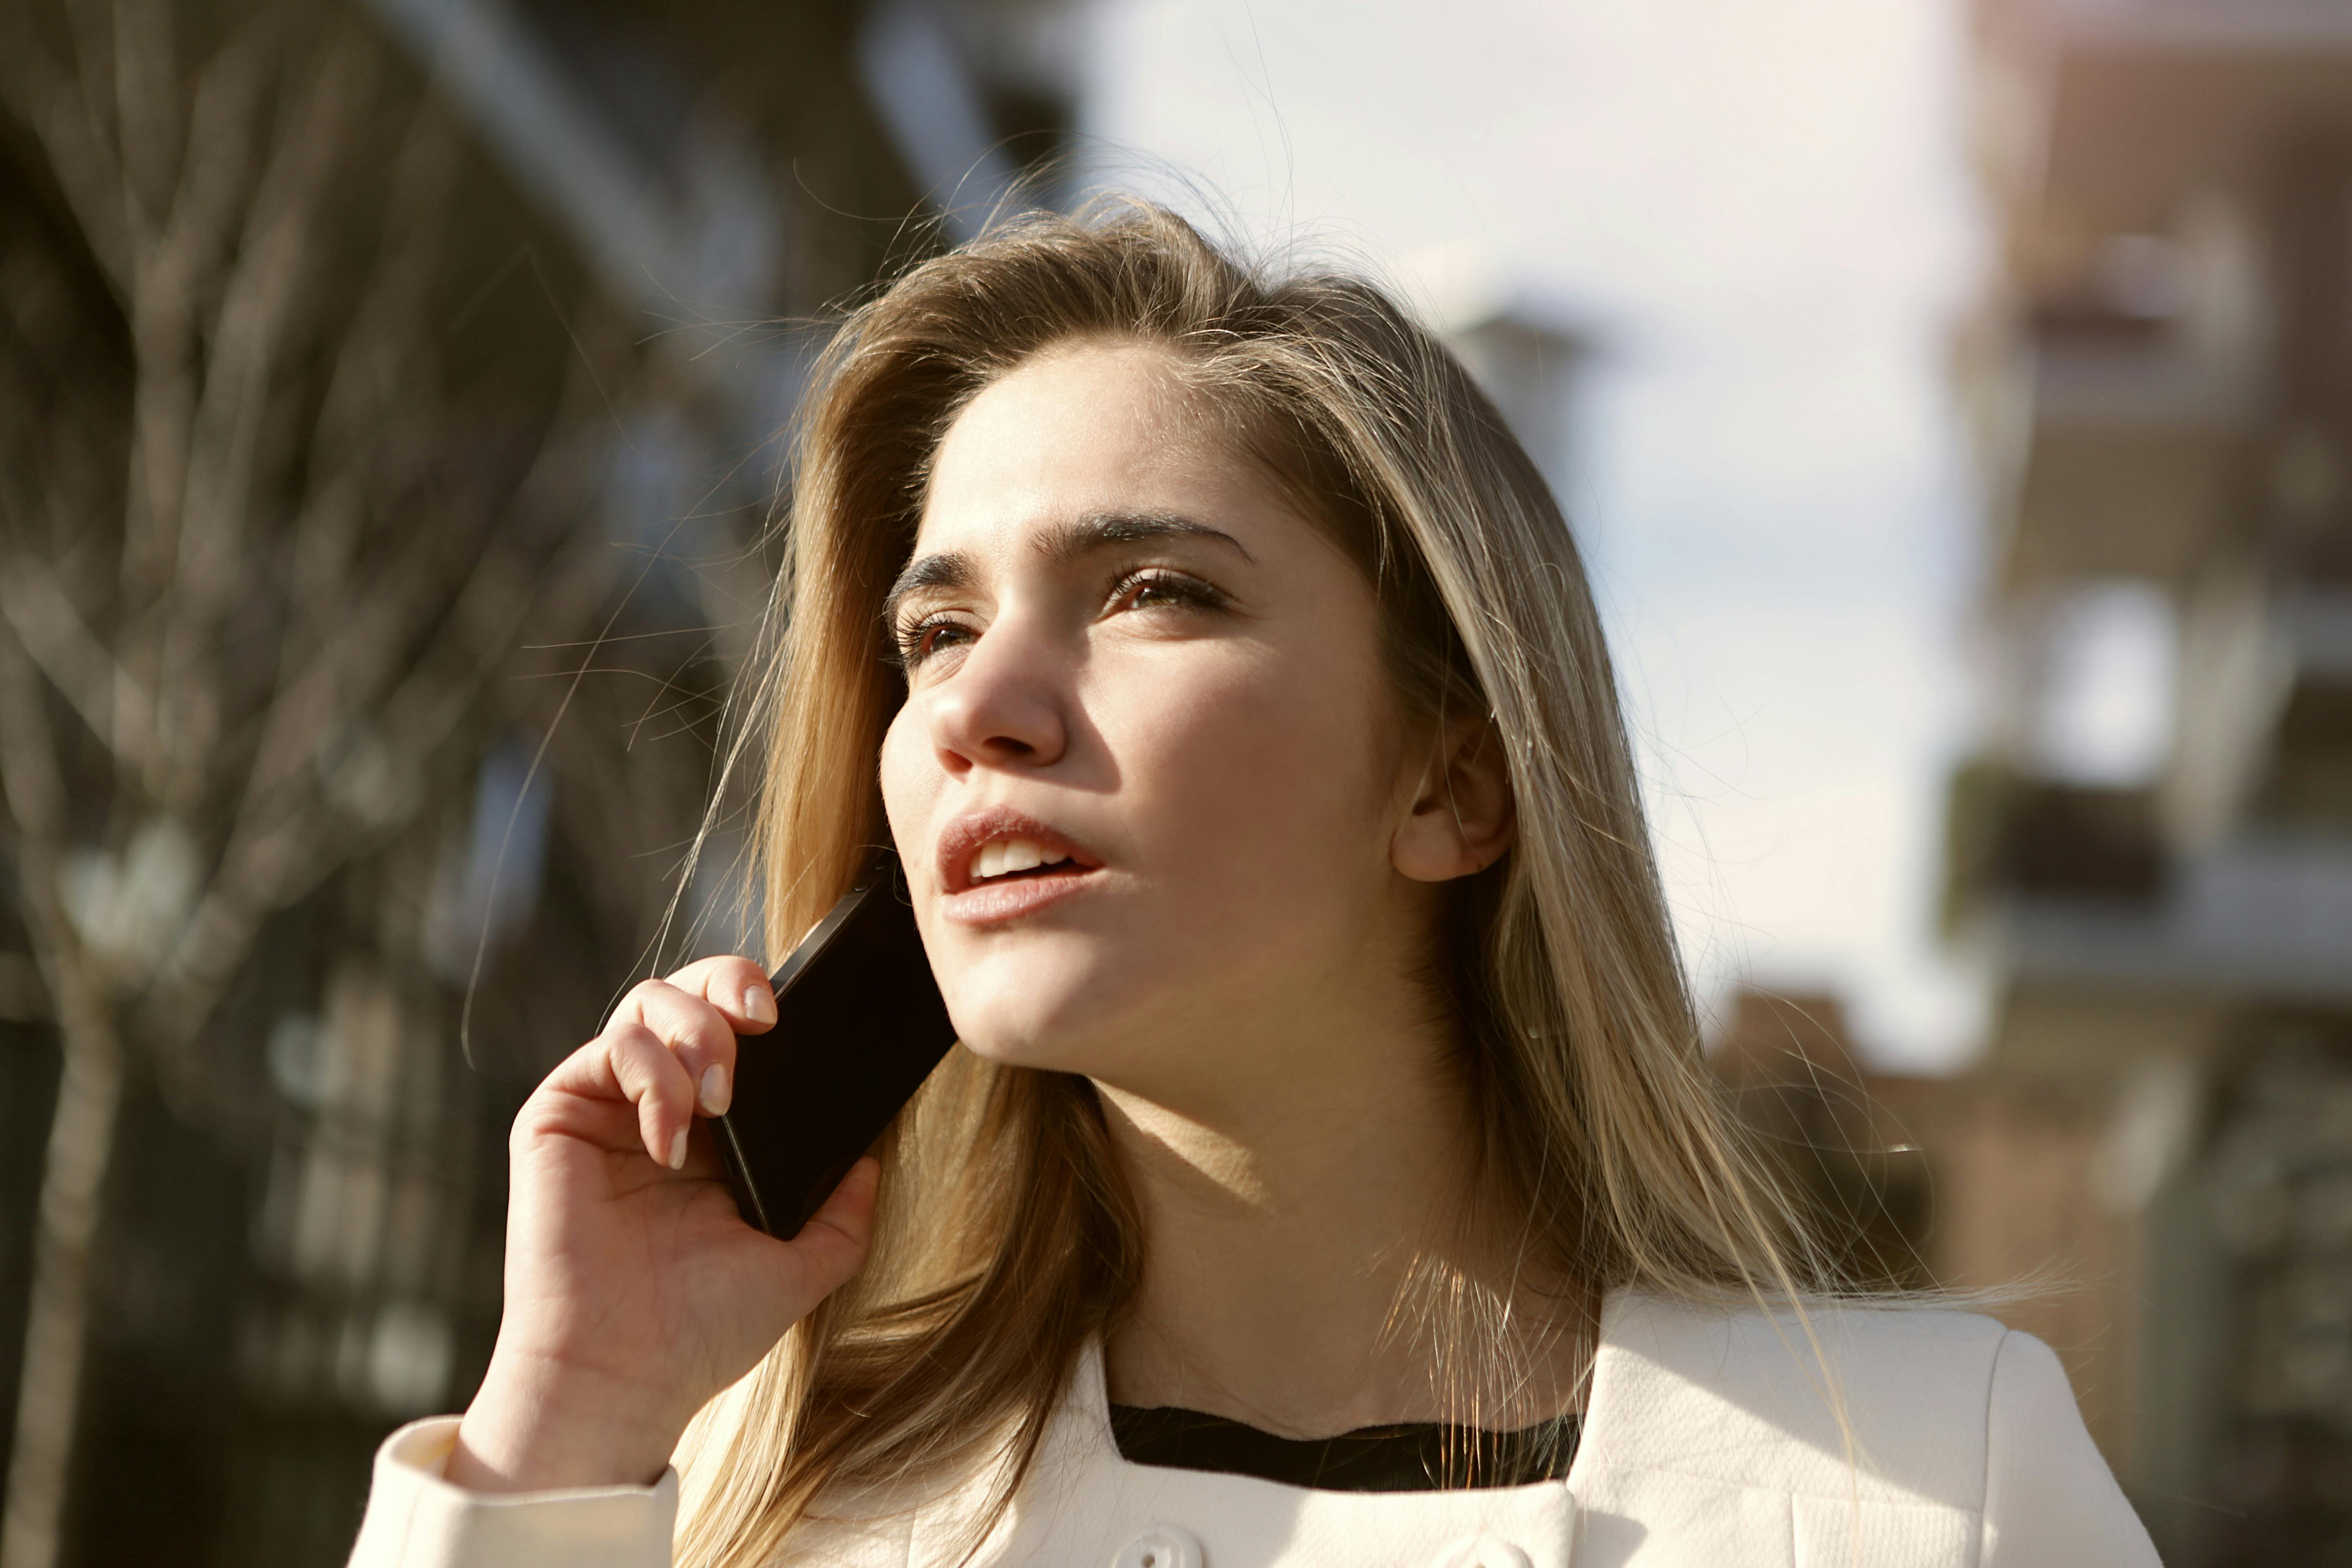 A surprised and confused woman talking the phone | Source: Pexels